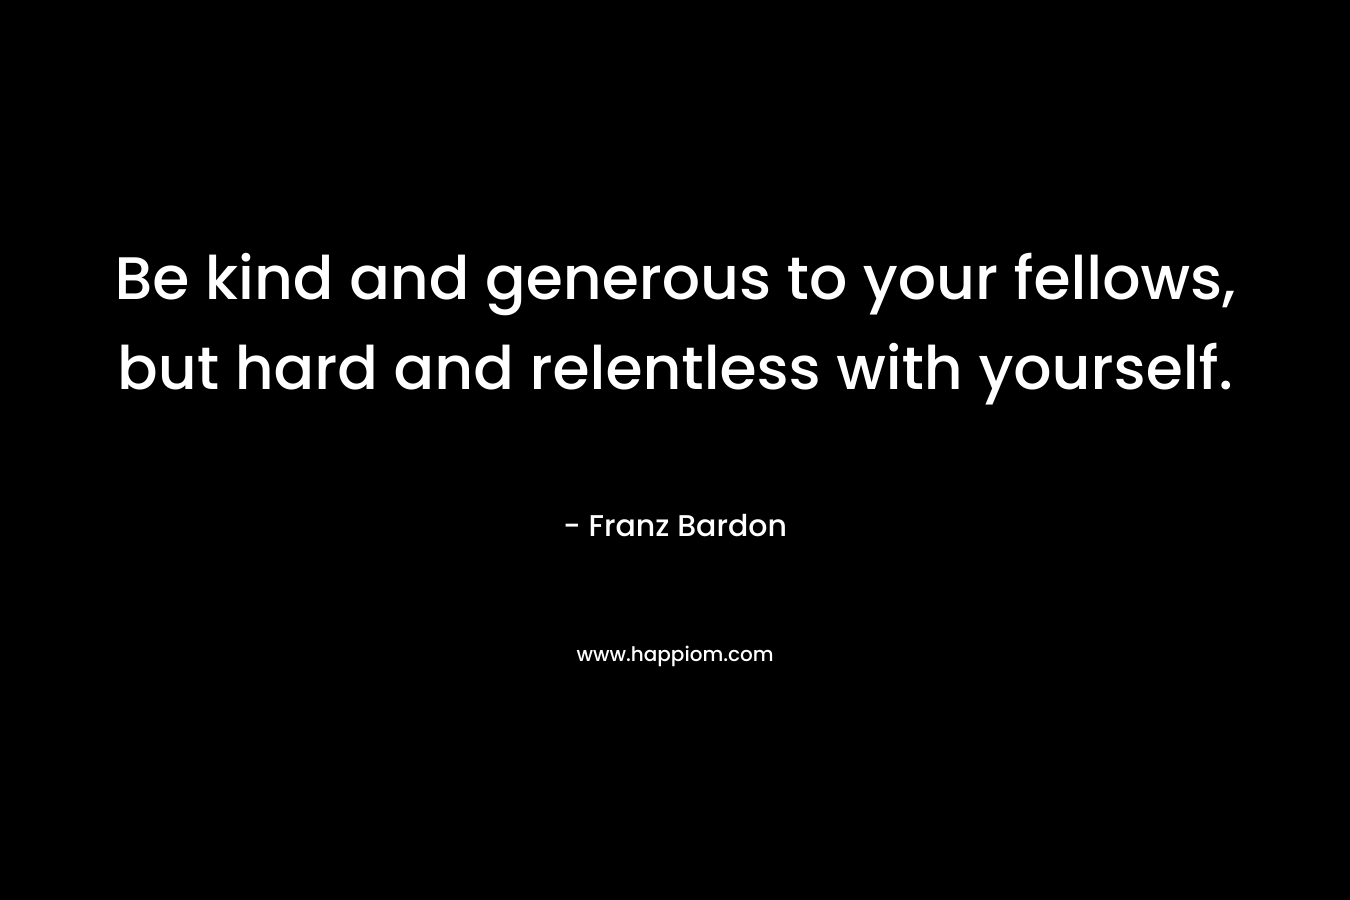 Be kind and generous to your fellows, but hard and relentless with yourself.